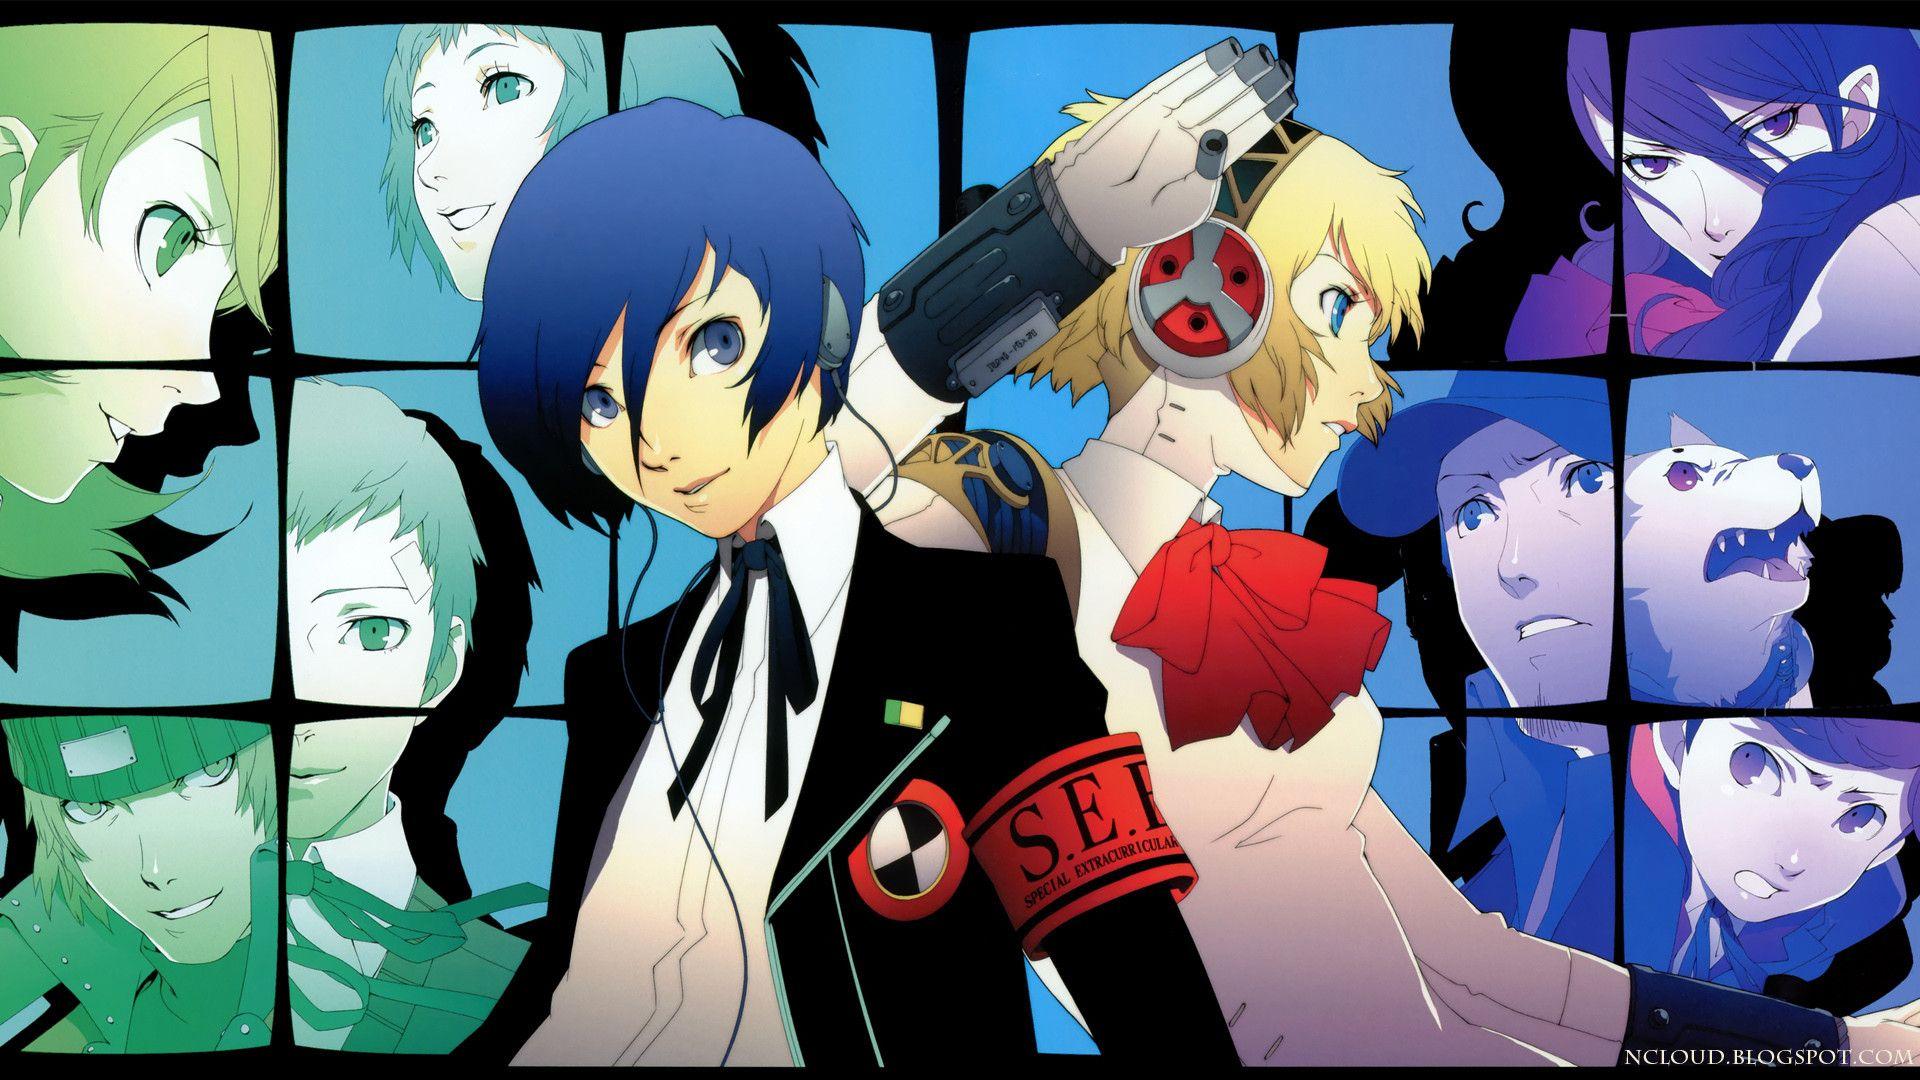 Games Movies Music Anime: Persona 3 FES coming to NA PSN